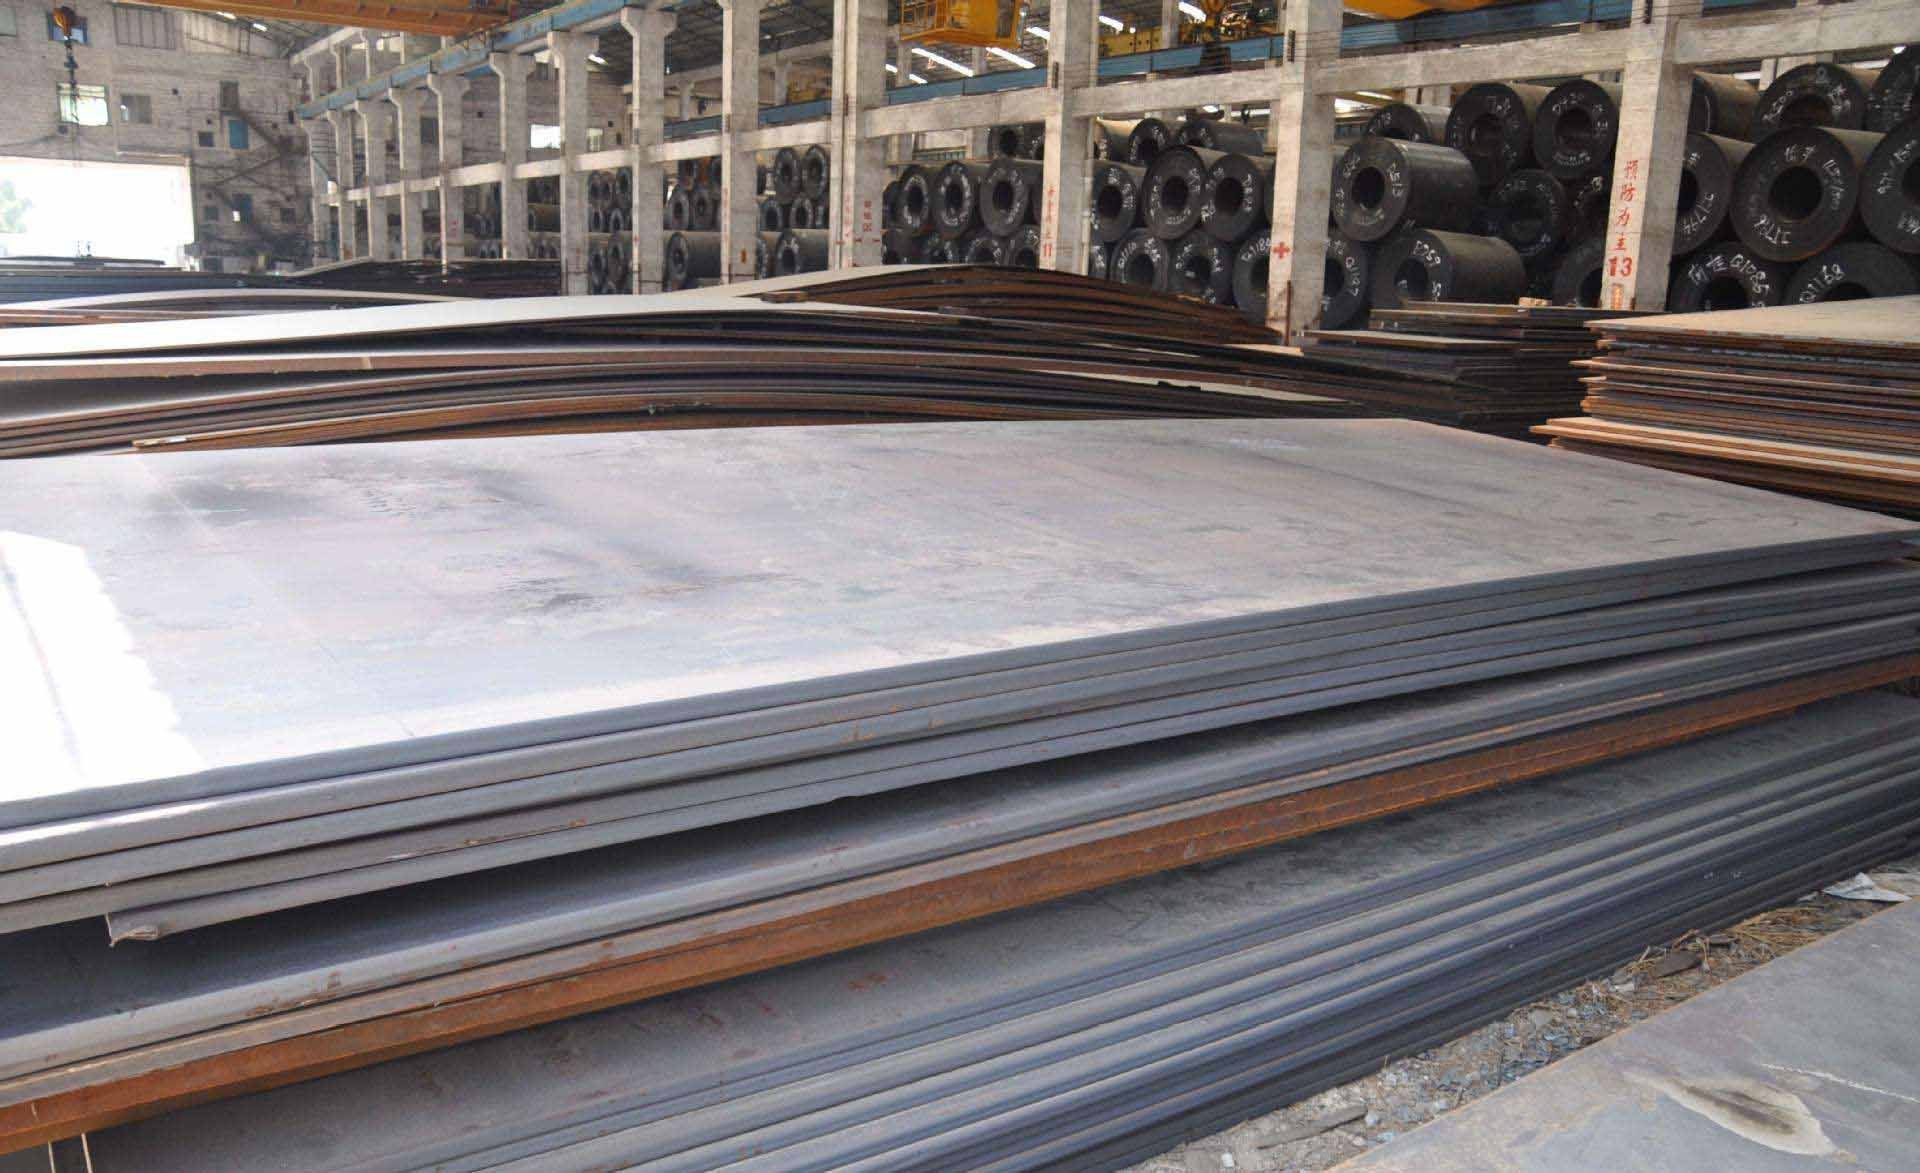 China exported 3.2 million tons of steel sheets in June